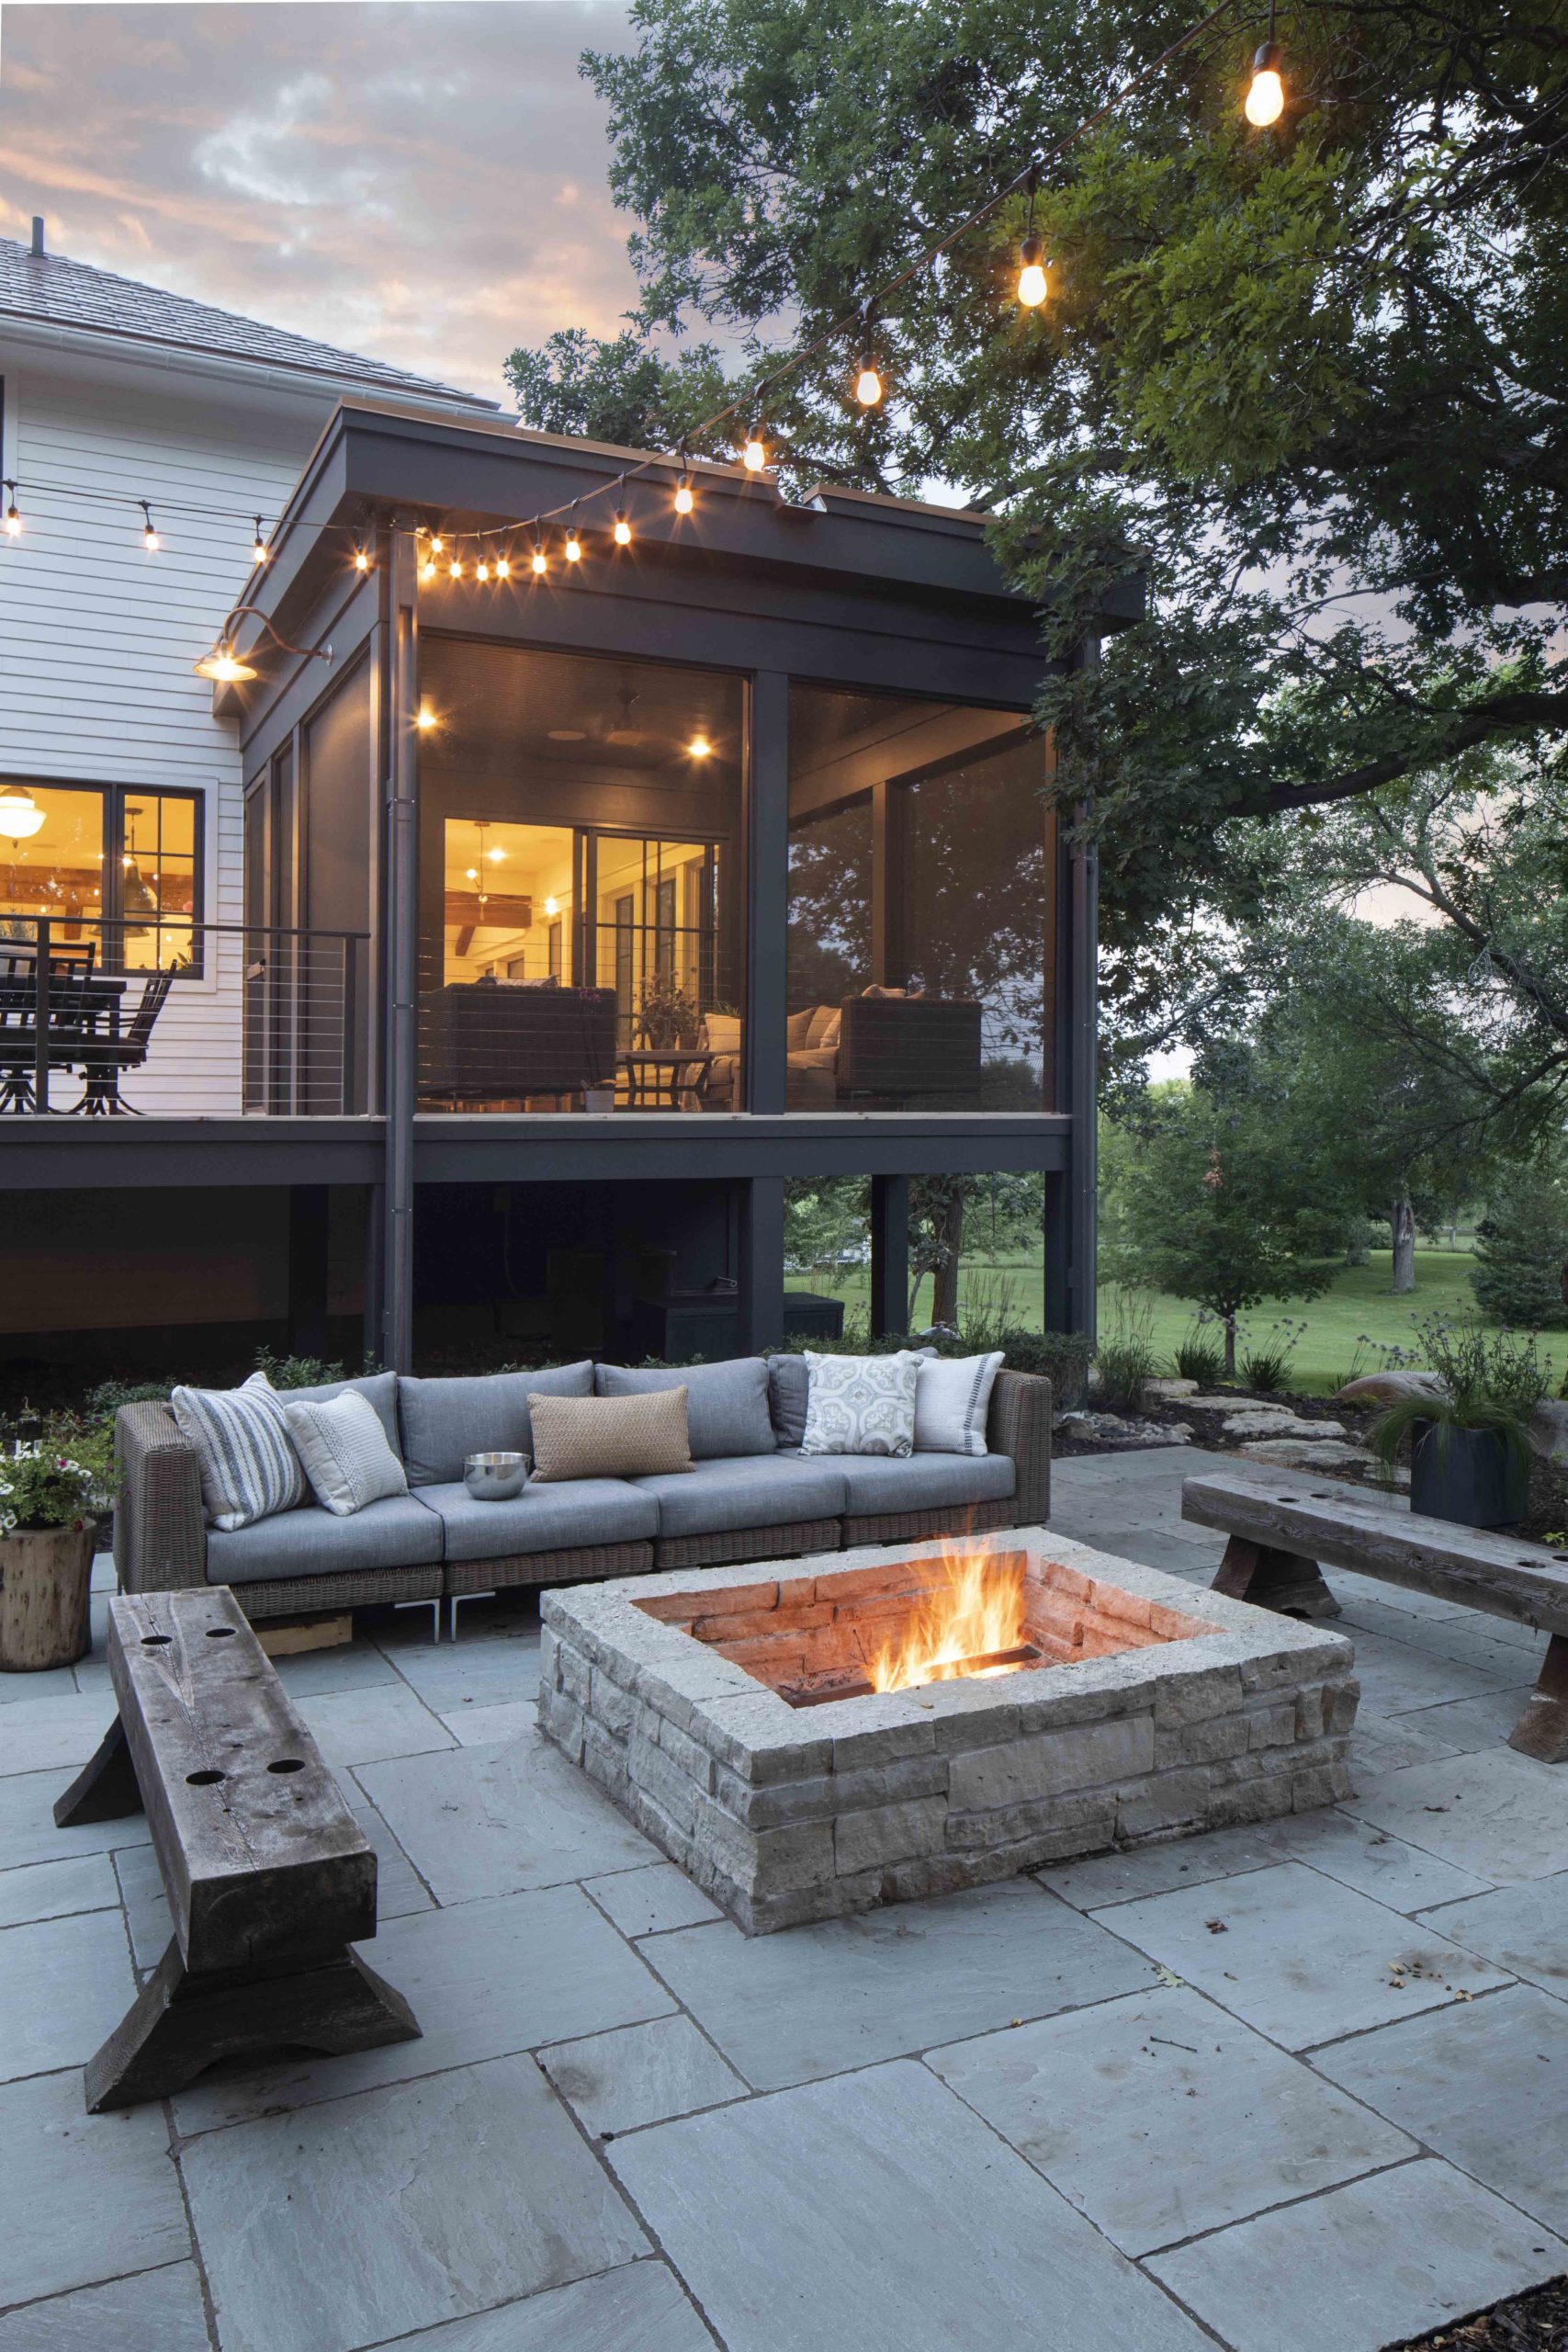 A prairie-style backyard with a fire pit and patio furniture.